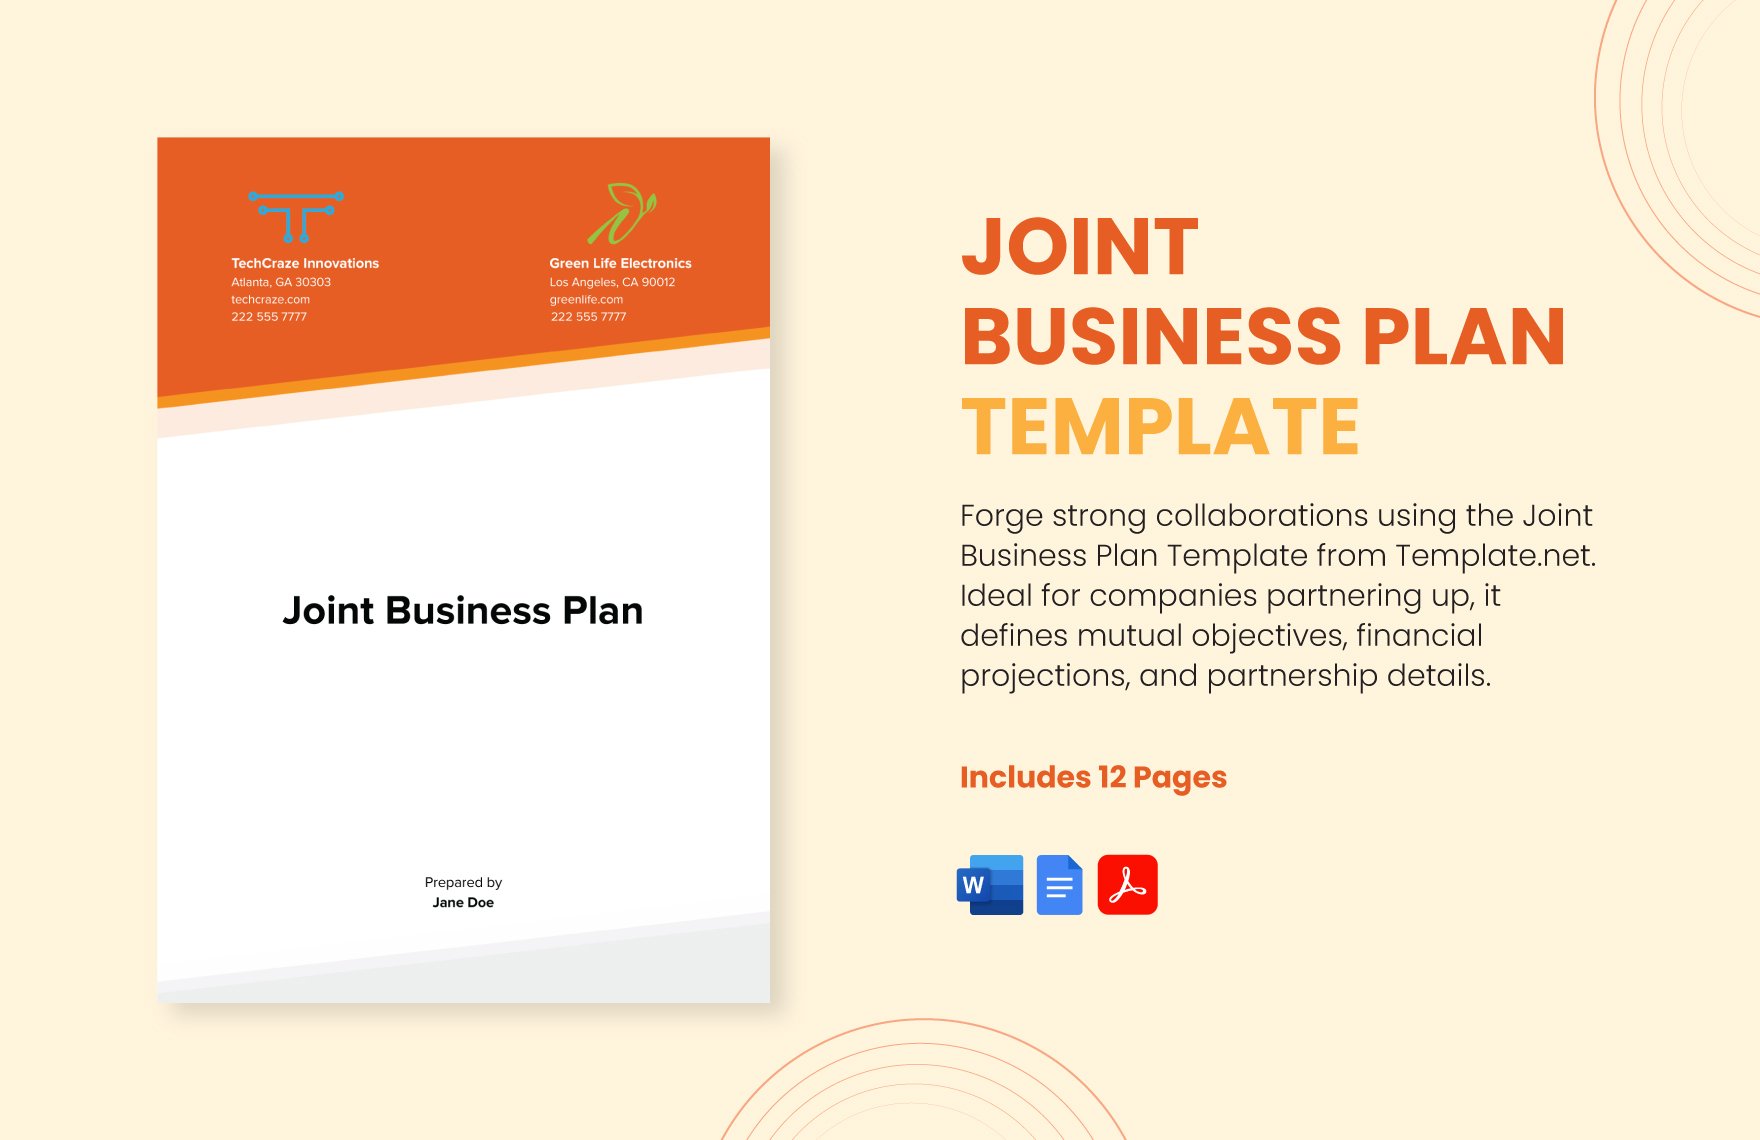 Joint Business Plan Template in Word, Google Docs, PDF